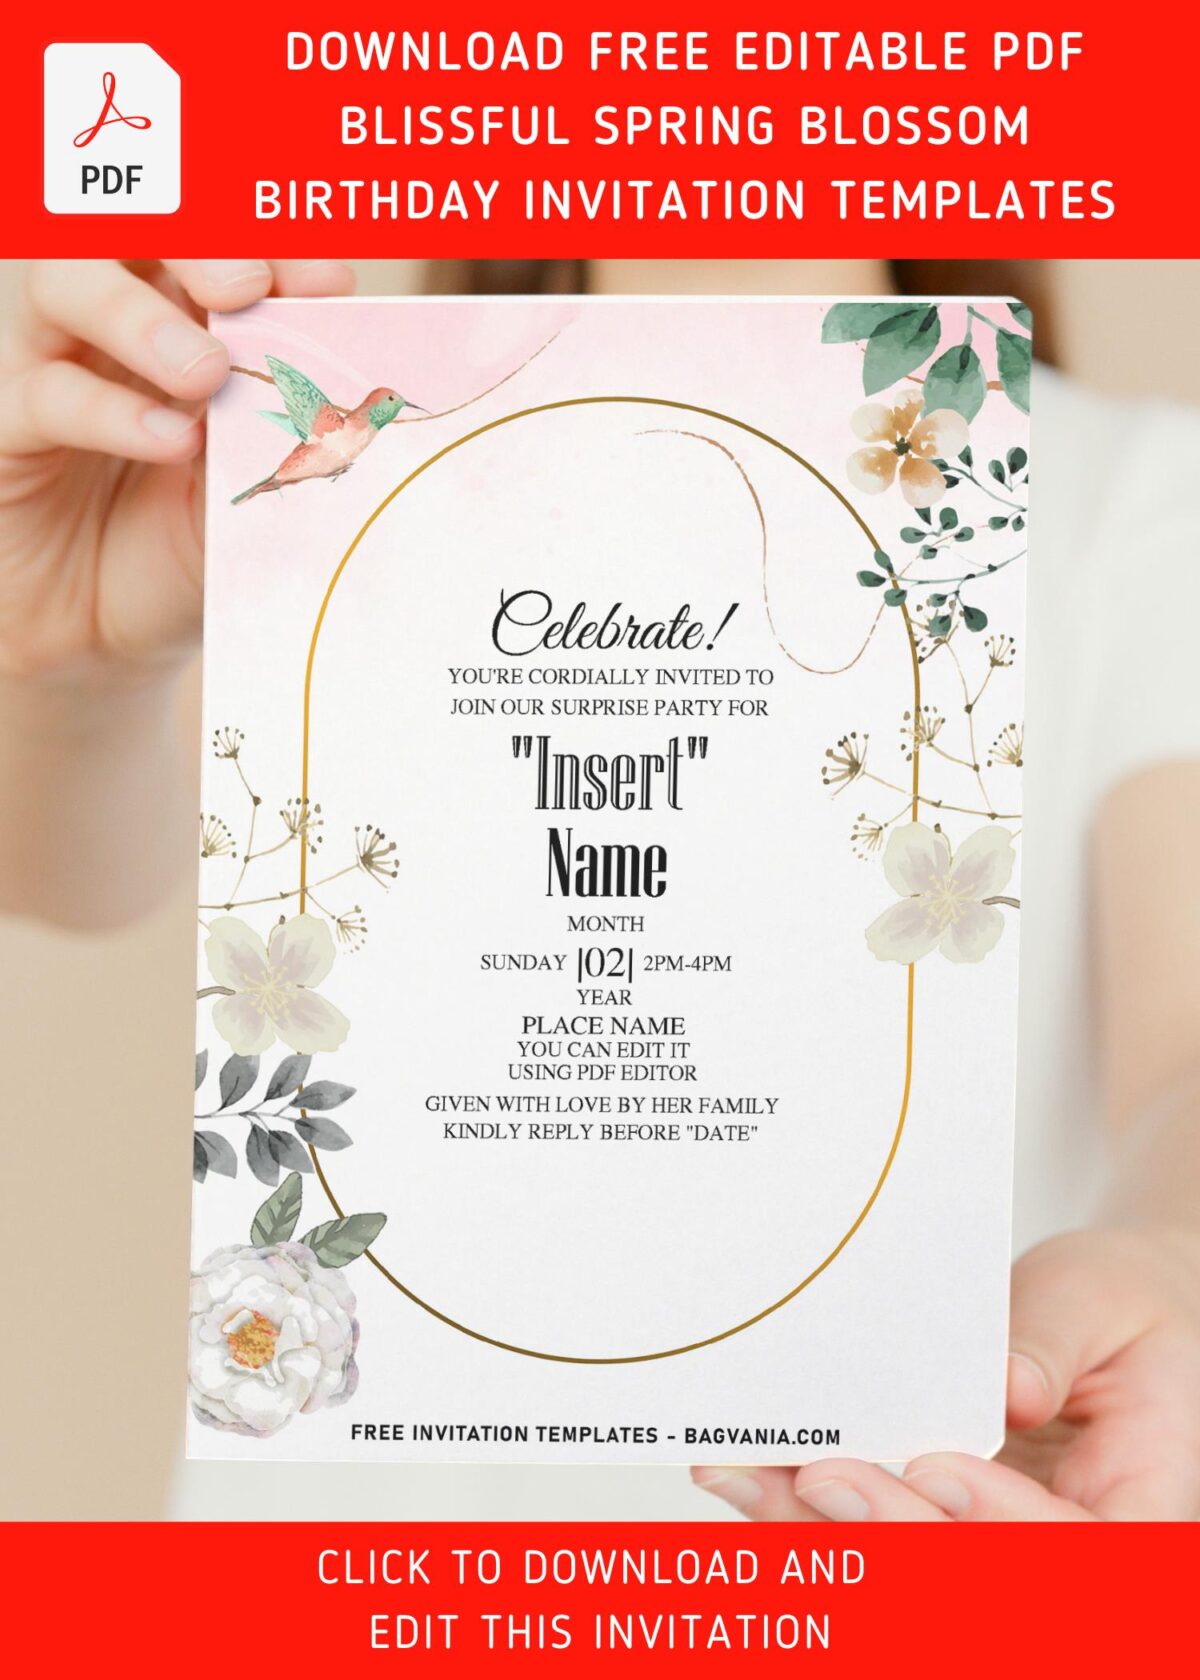 (Free Editable PDF) Blissful Spring Blossom Invitation Templates That You'll Love Forever